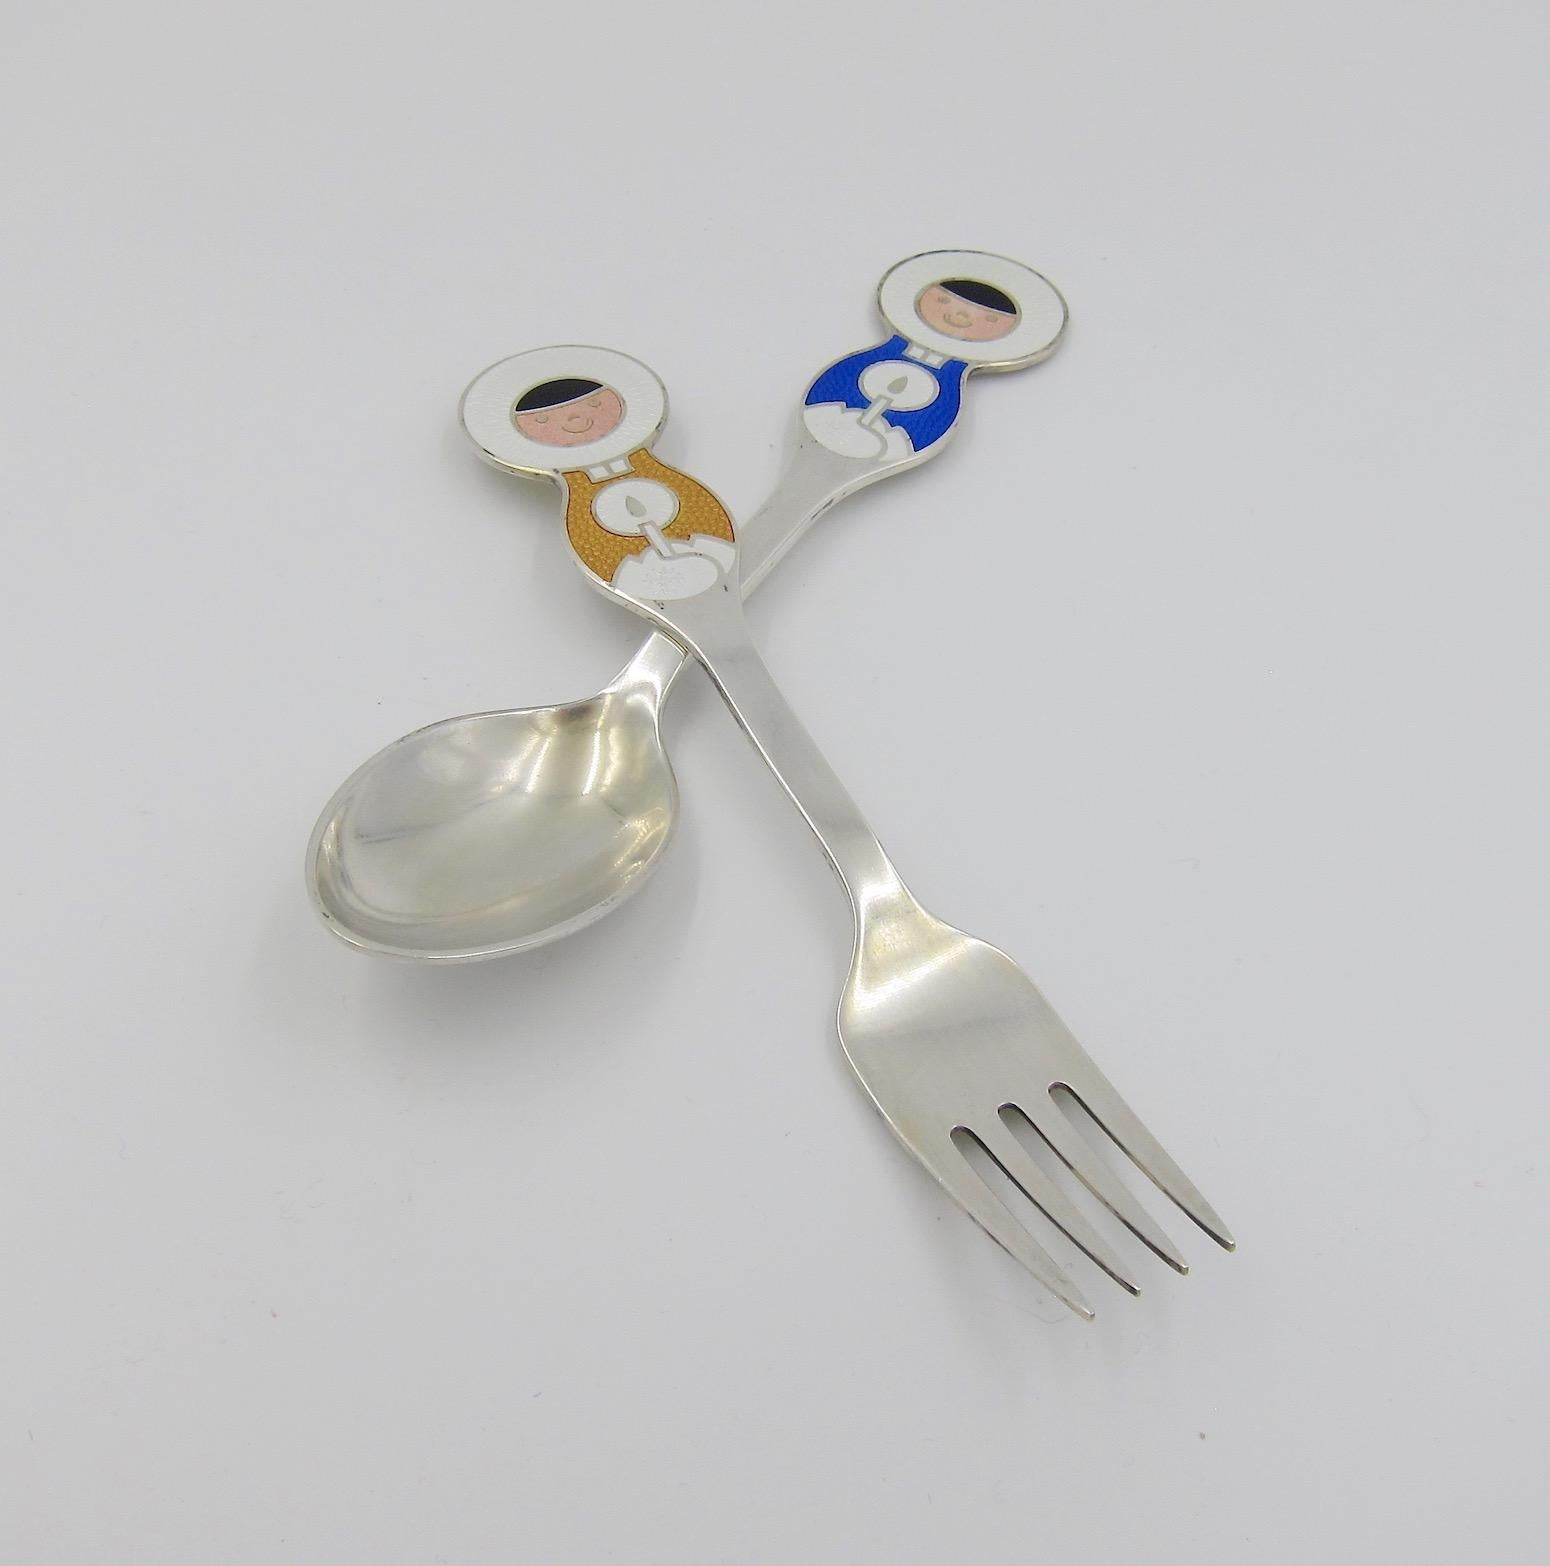 A Danish sterling silver and enamel Christmas fork and spoon set from Anton Michelsen of Copenhagen, Denmark. Artist Ib Antoni (1929-1973) created this 